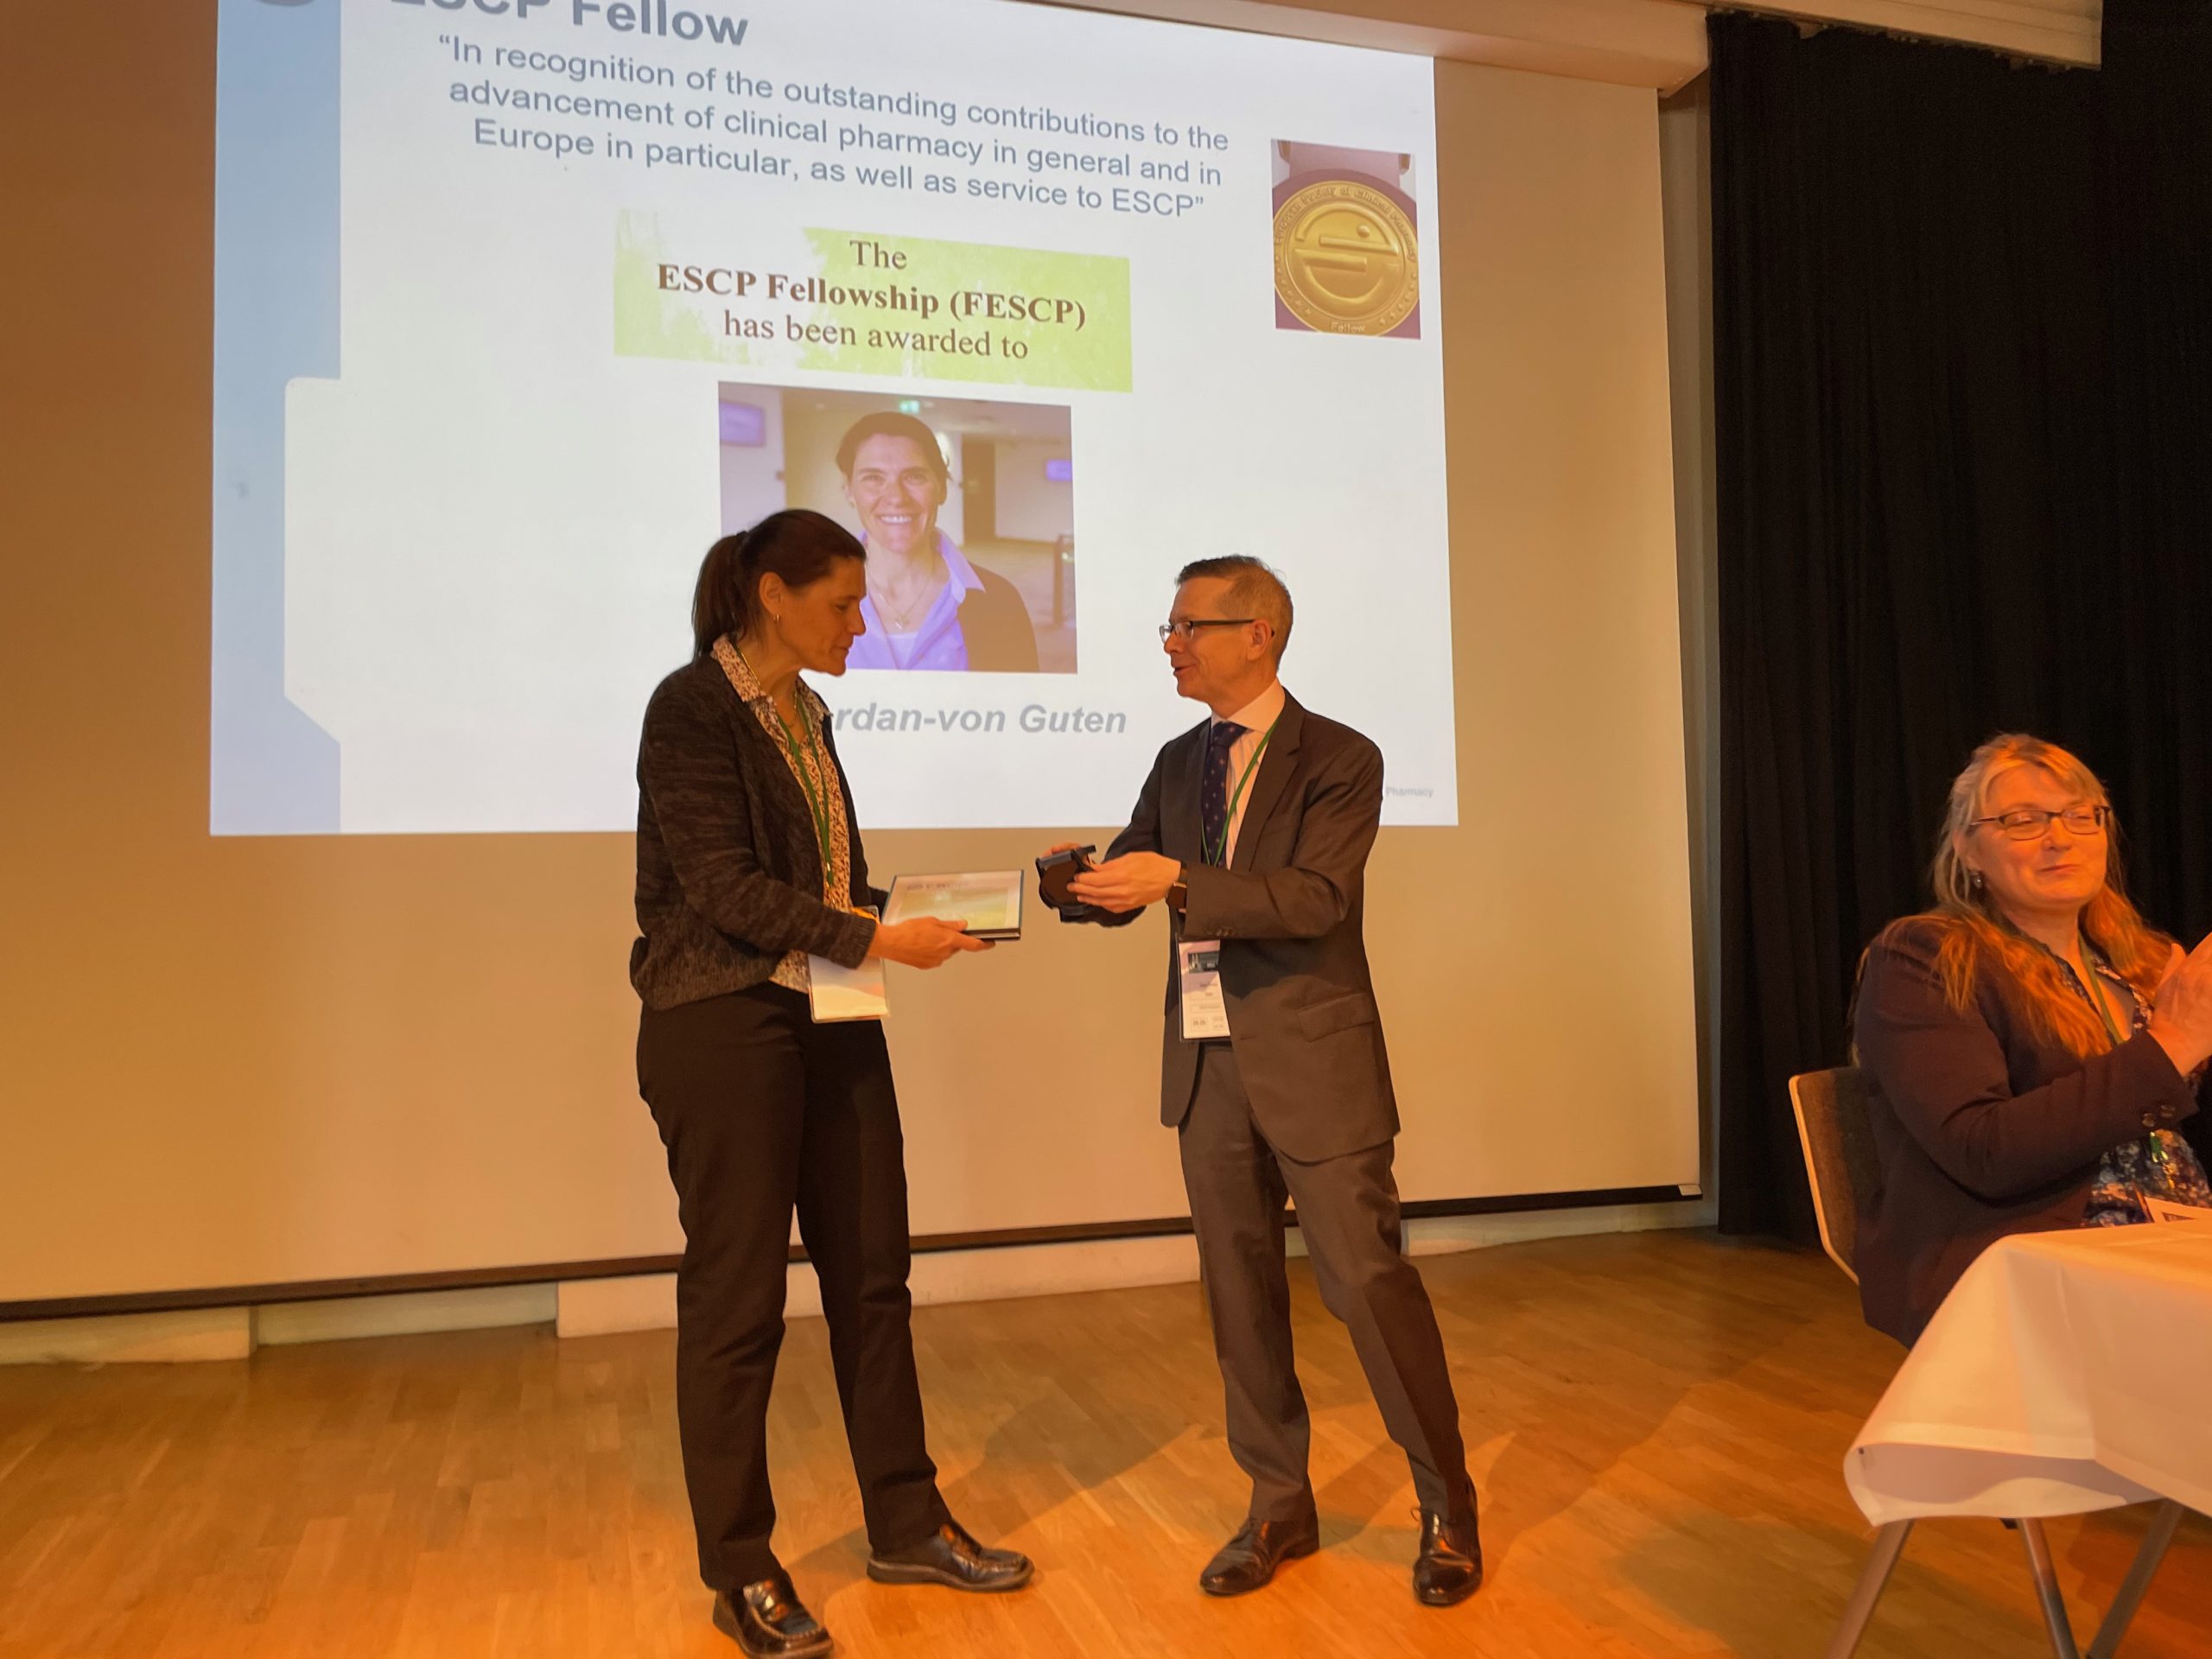 ESCP Fellow awarded at the International Workshop in Zurich, April 2022